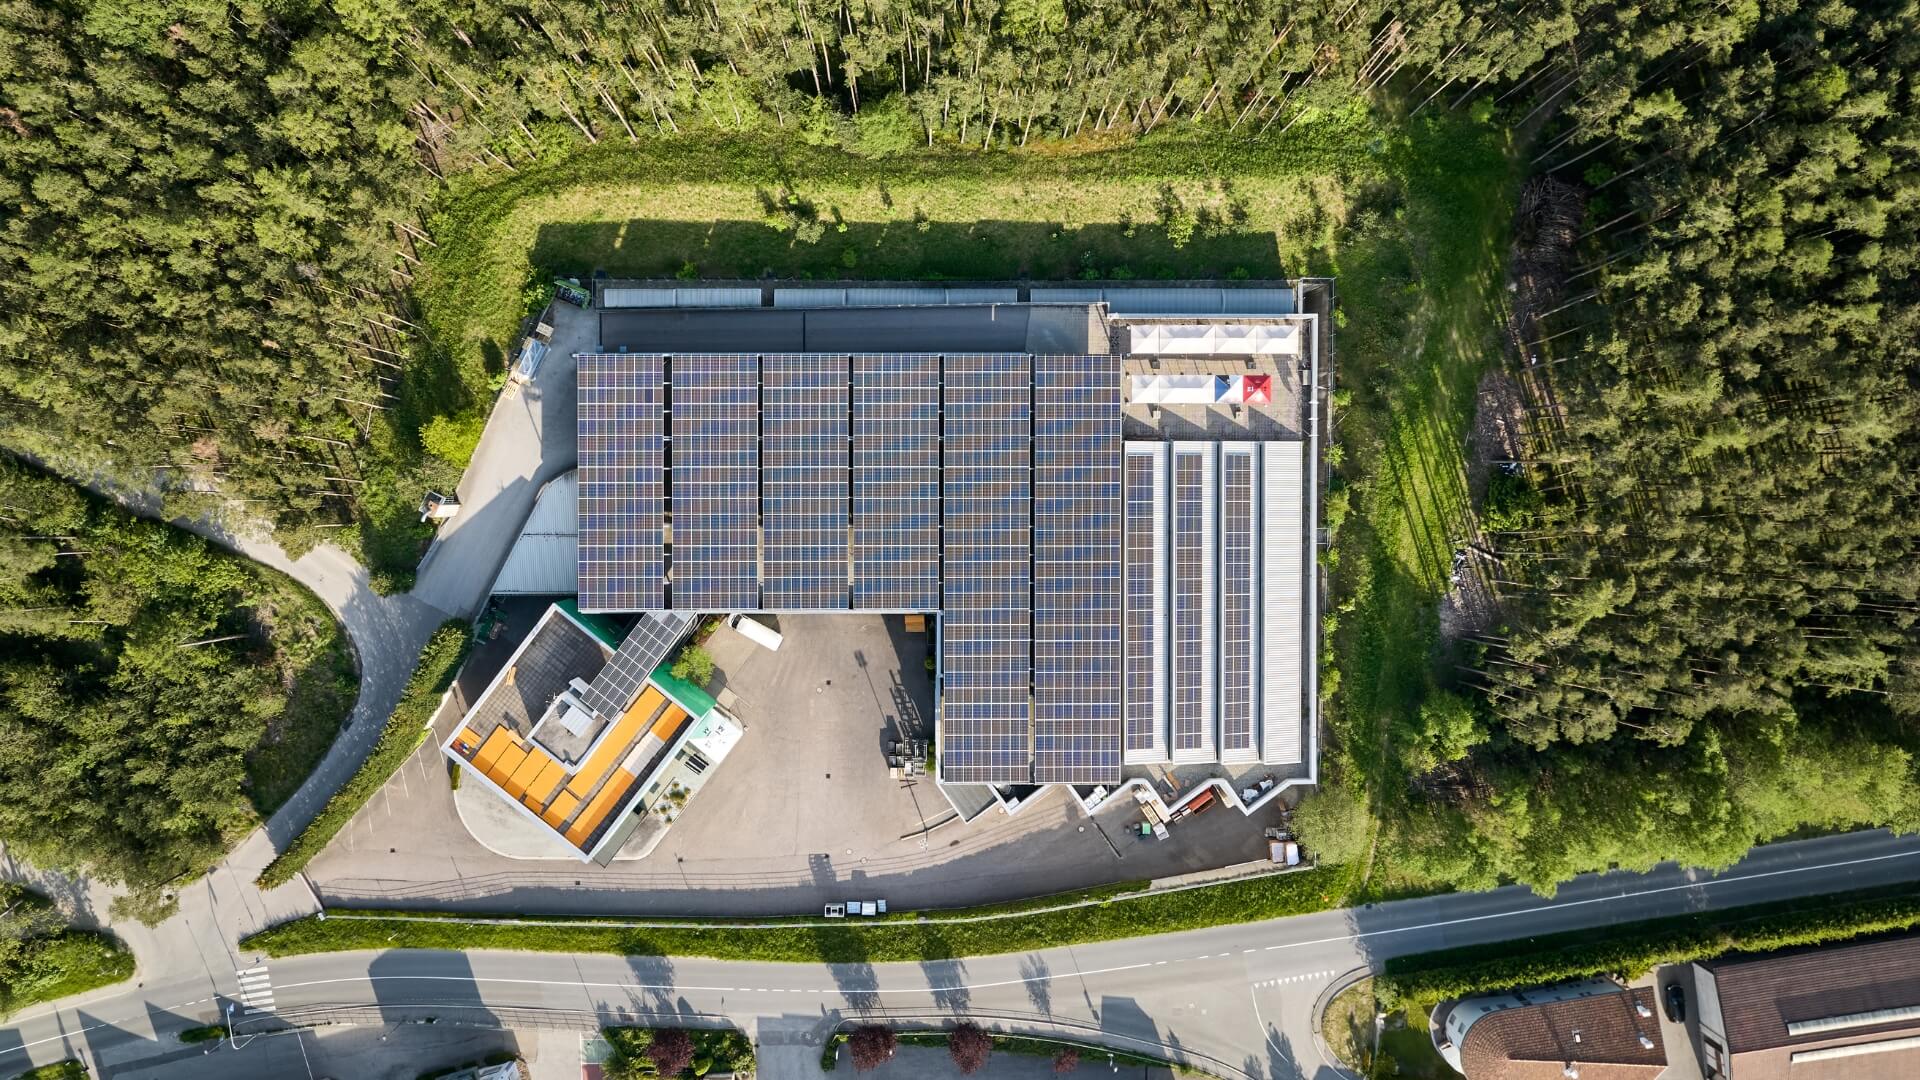 You can see the headquarters in Italy from above with its photovoltaic system .